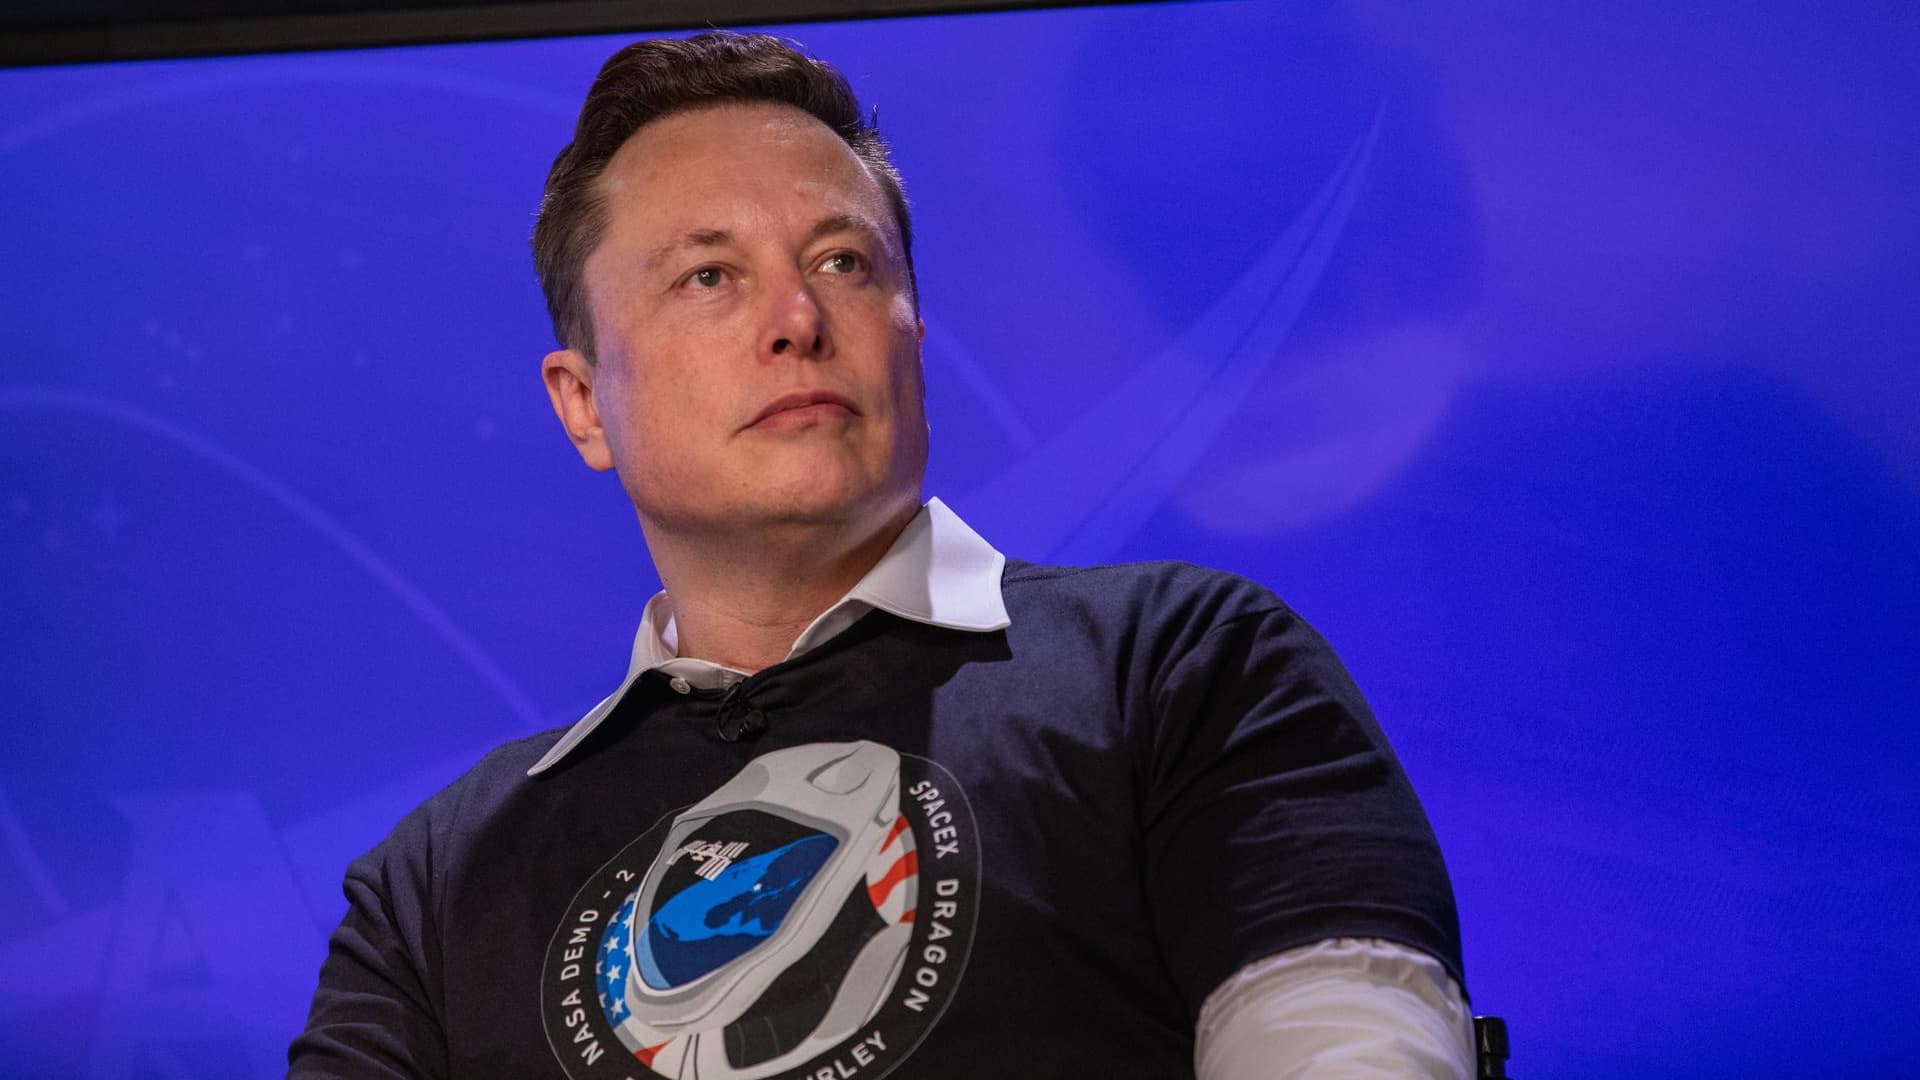 SpaceX president defends Elon Musk over sexual misconduct claims: 'I believe the allegations to be false'